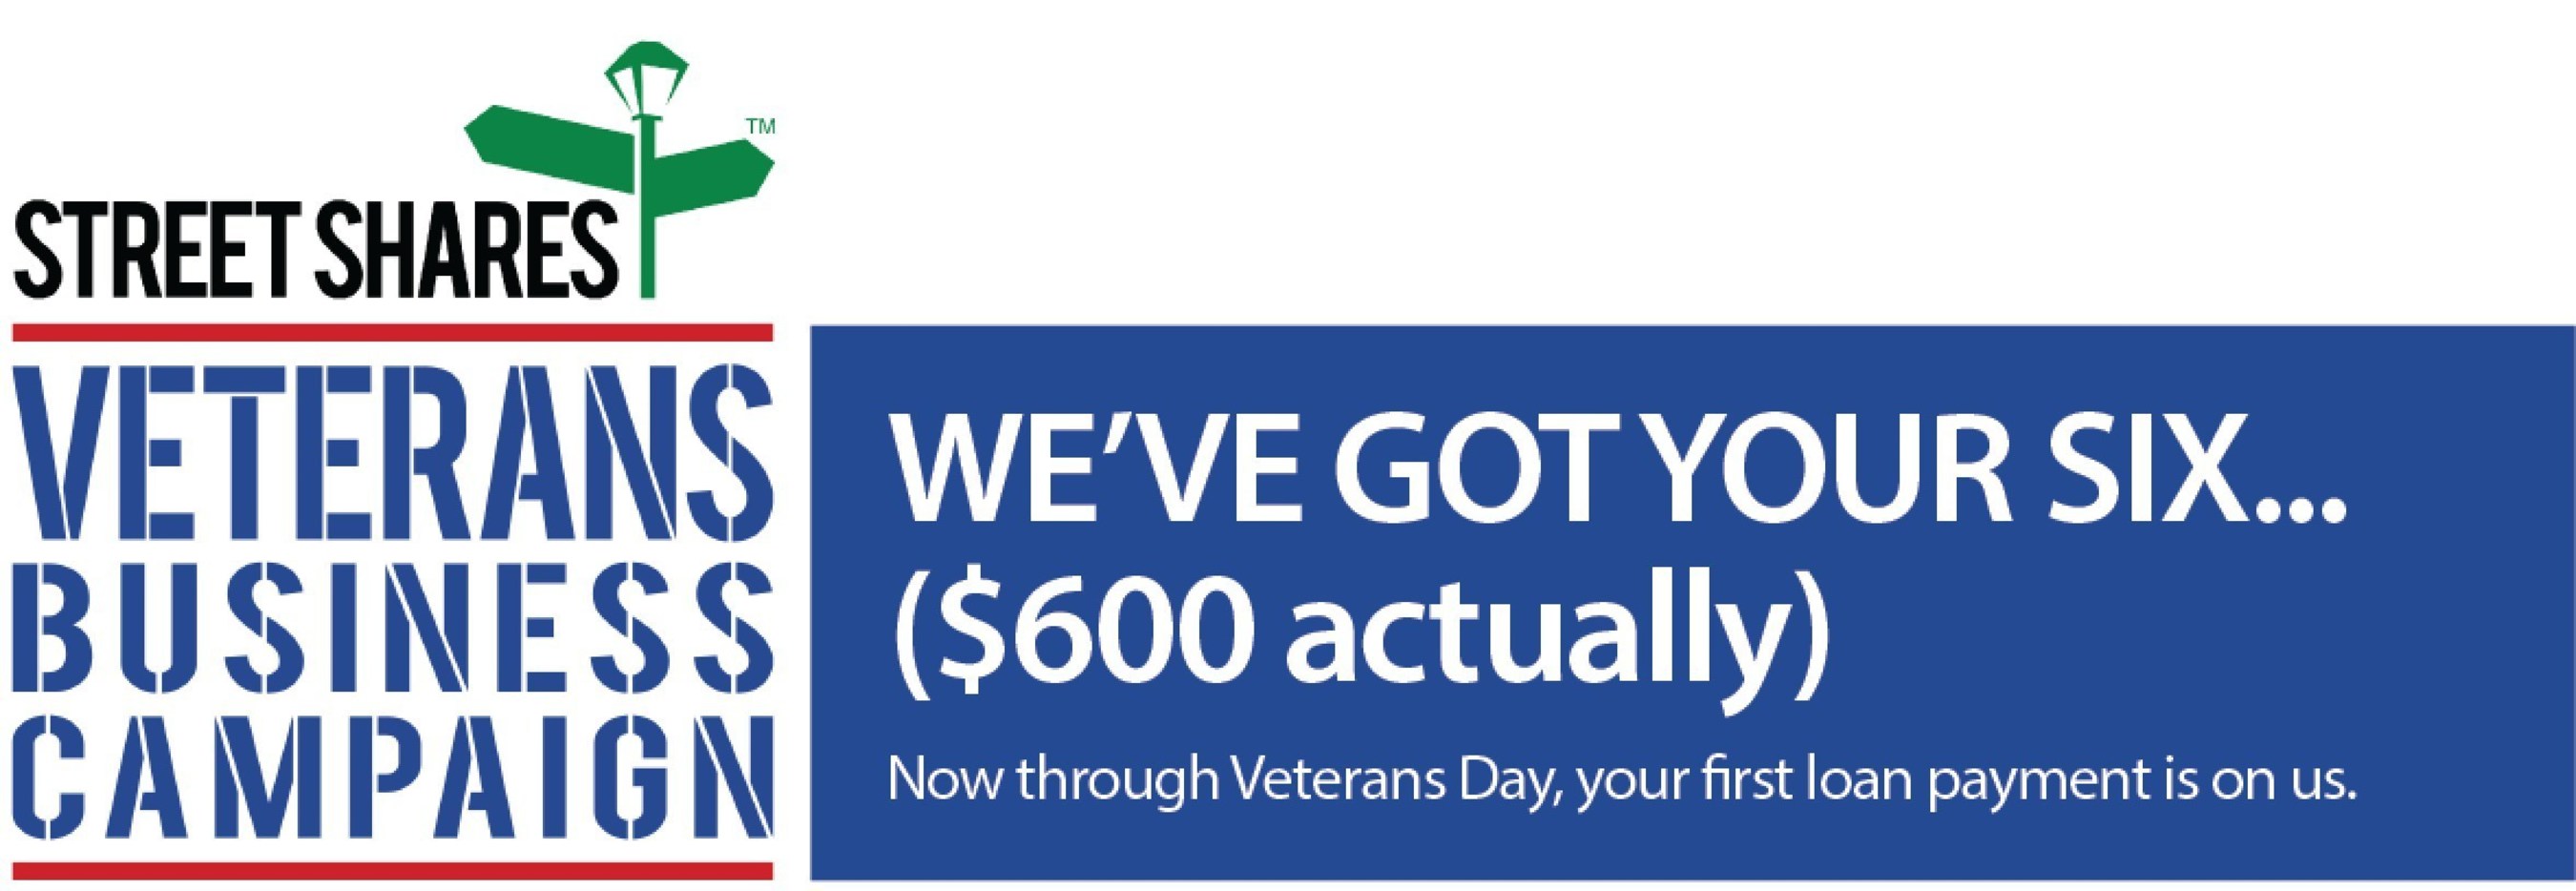 To celebrate National Veterans Small Business Week and Veterans Day, StreetShares introduces 'GOT YOUR SIX' campaign, will cover first loan payment for veteran borrowers on StreetShares marketplace, up to $600